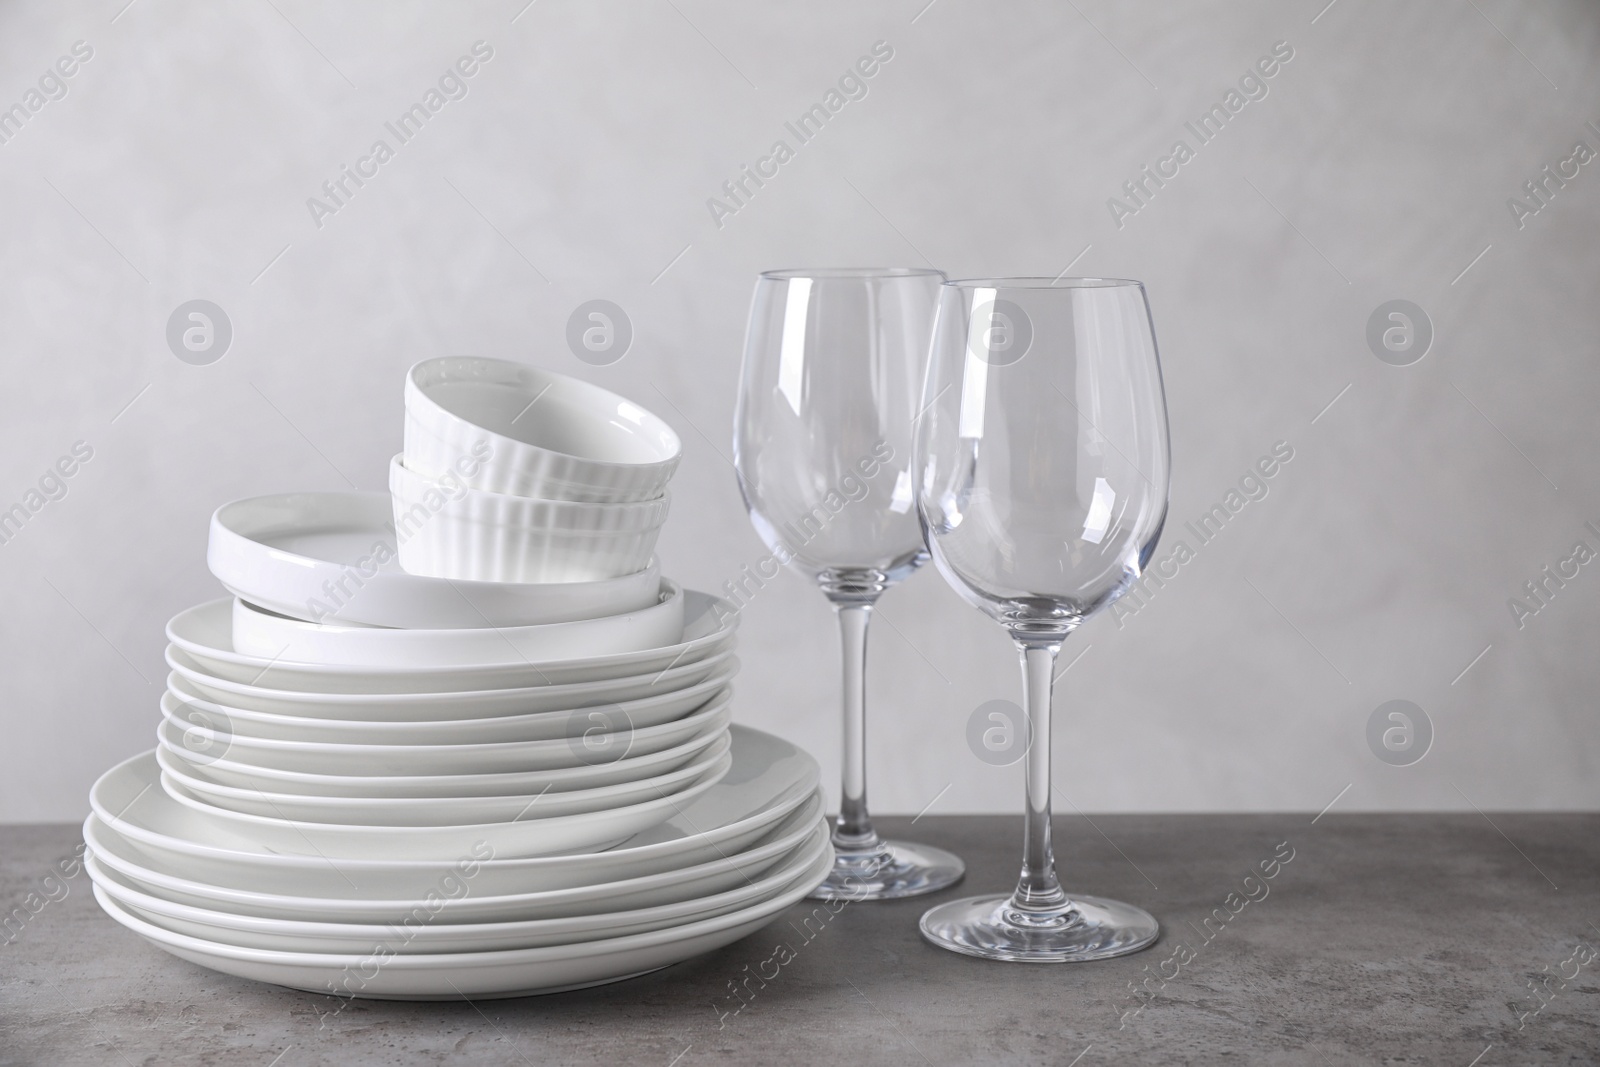 Photo of Set of clean dishware on grey table